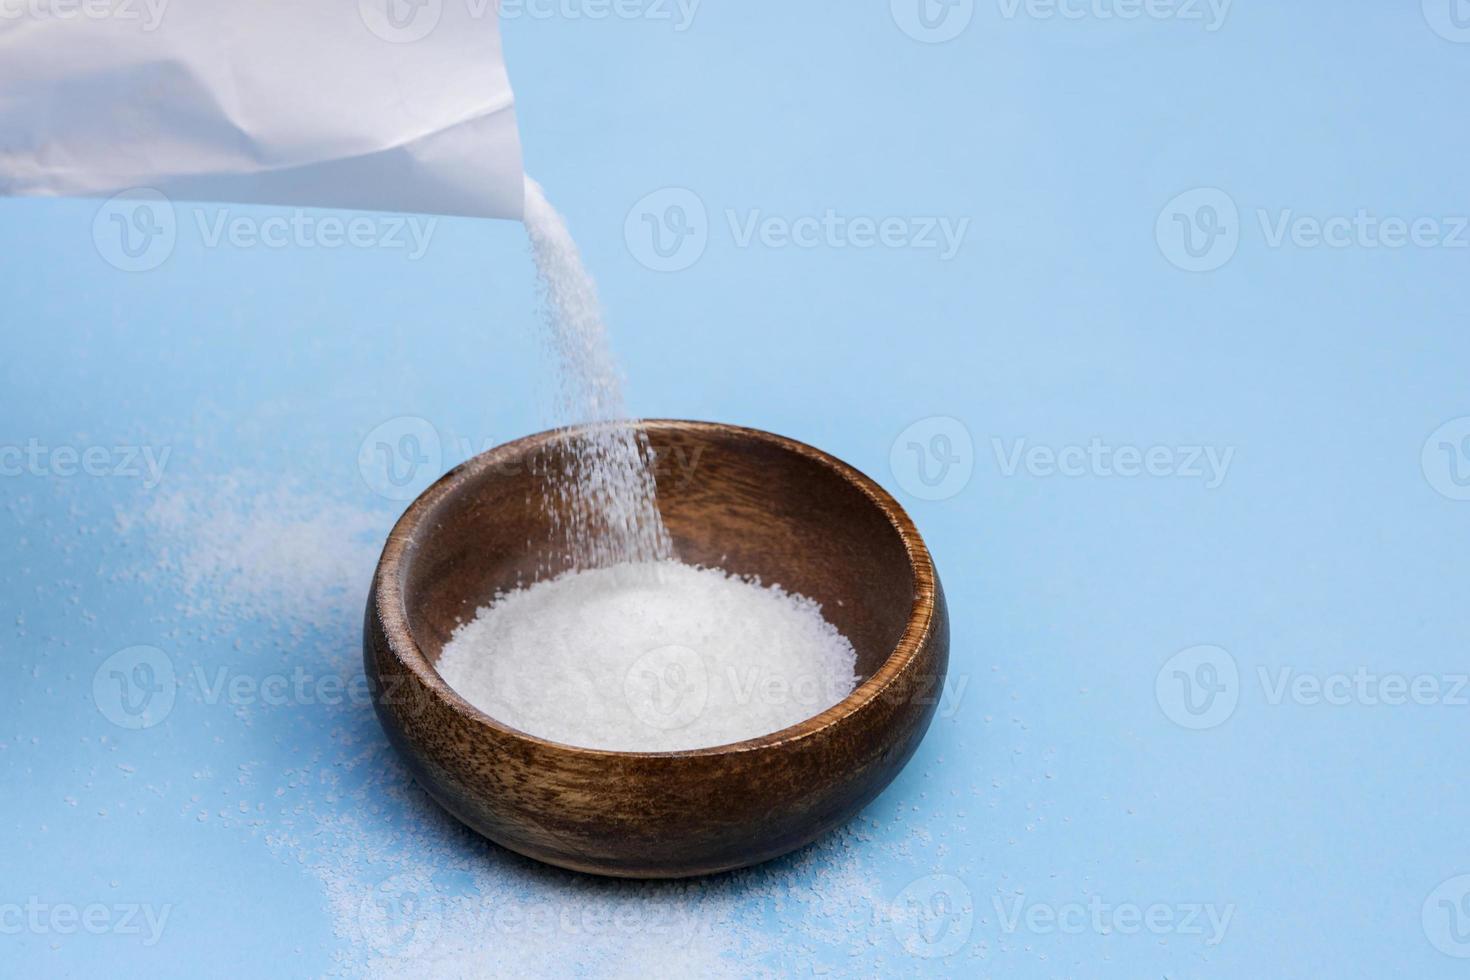 sugar is poured from a white paper bag into a wooden bowl on a blue background photo